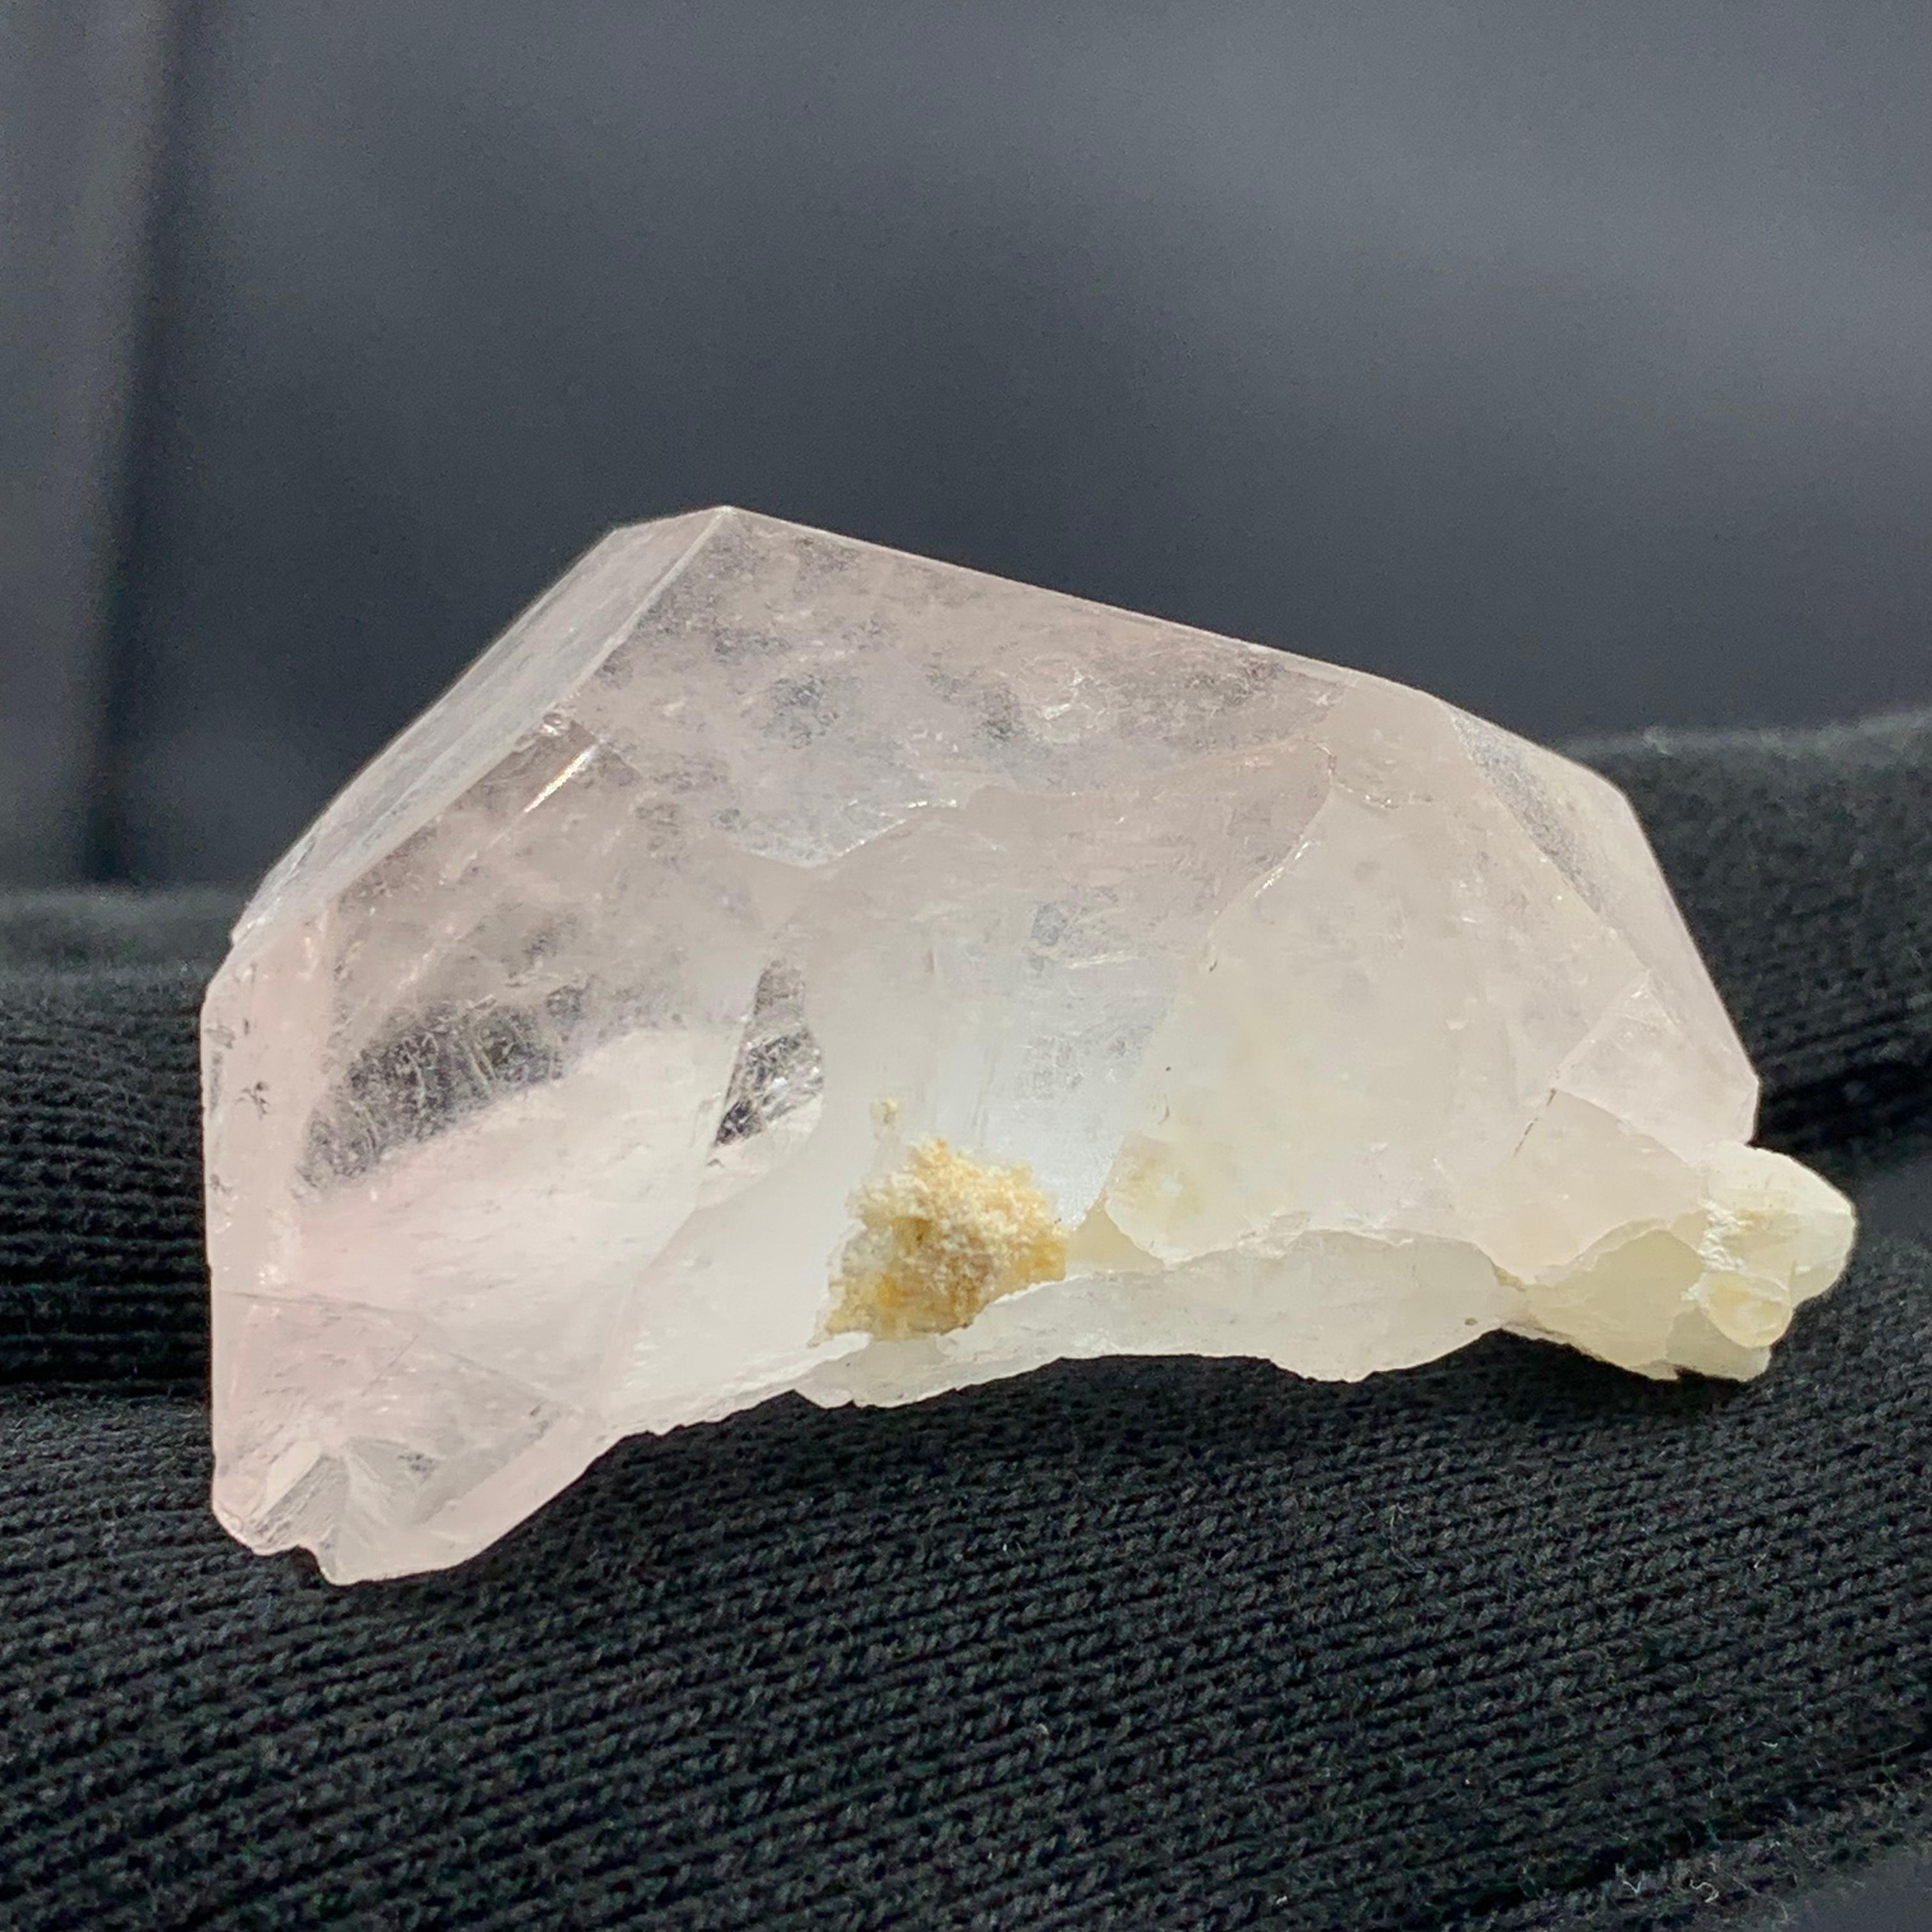 160.25 Carat Incredible Morganite Crystal From Afghanistan 
Weight: 160.25 Carat 
Dimension: 2.8 x 4.5 x 2.9 Cm 
Origin: Afghanistan 

Morganite is used by metaphysical healers mainly to treat the heart. It is also said to benefit the nervous system